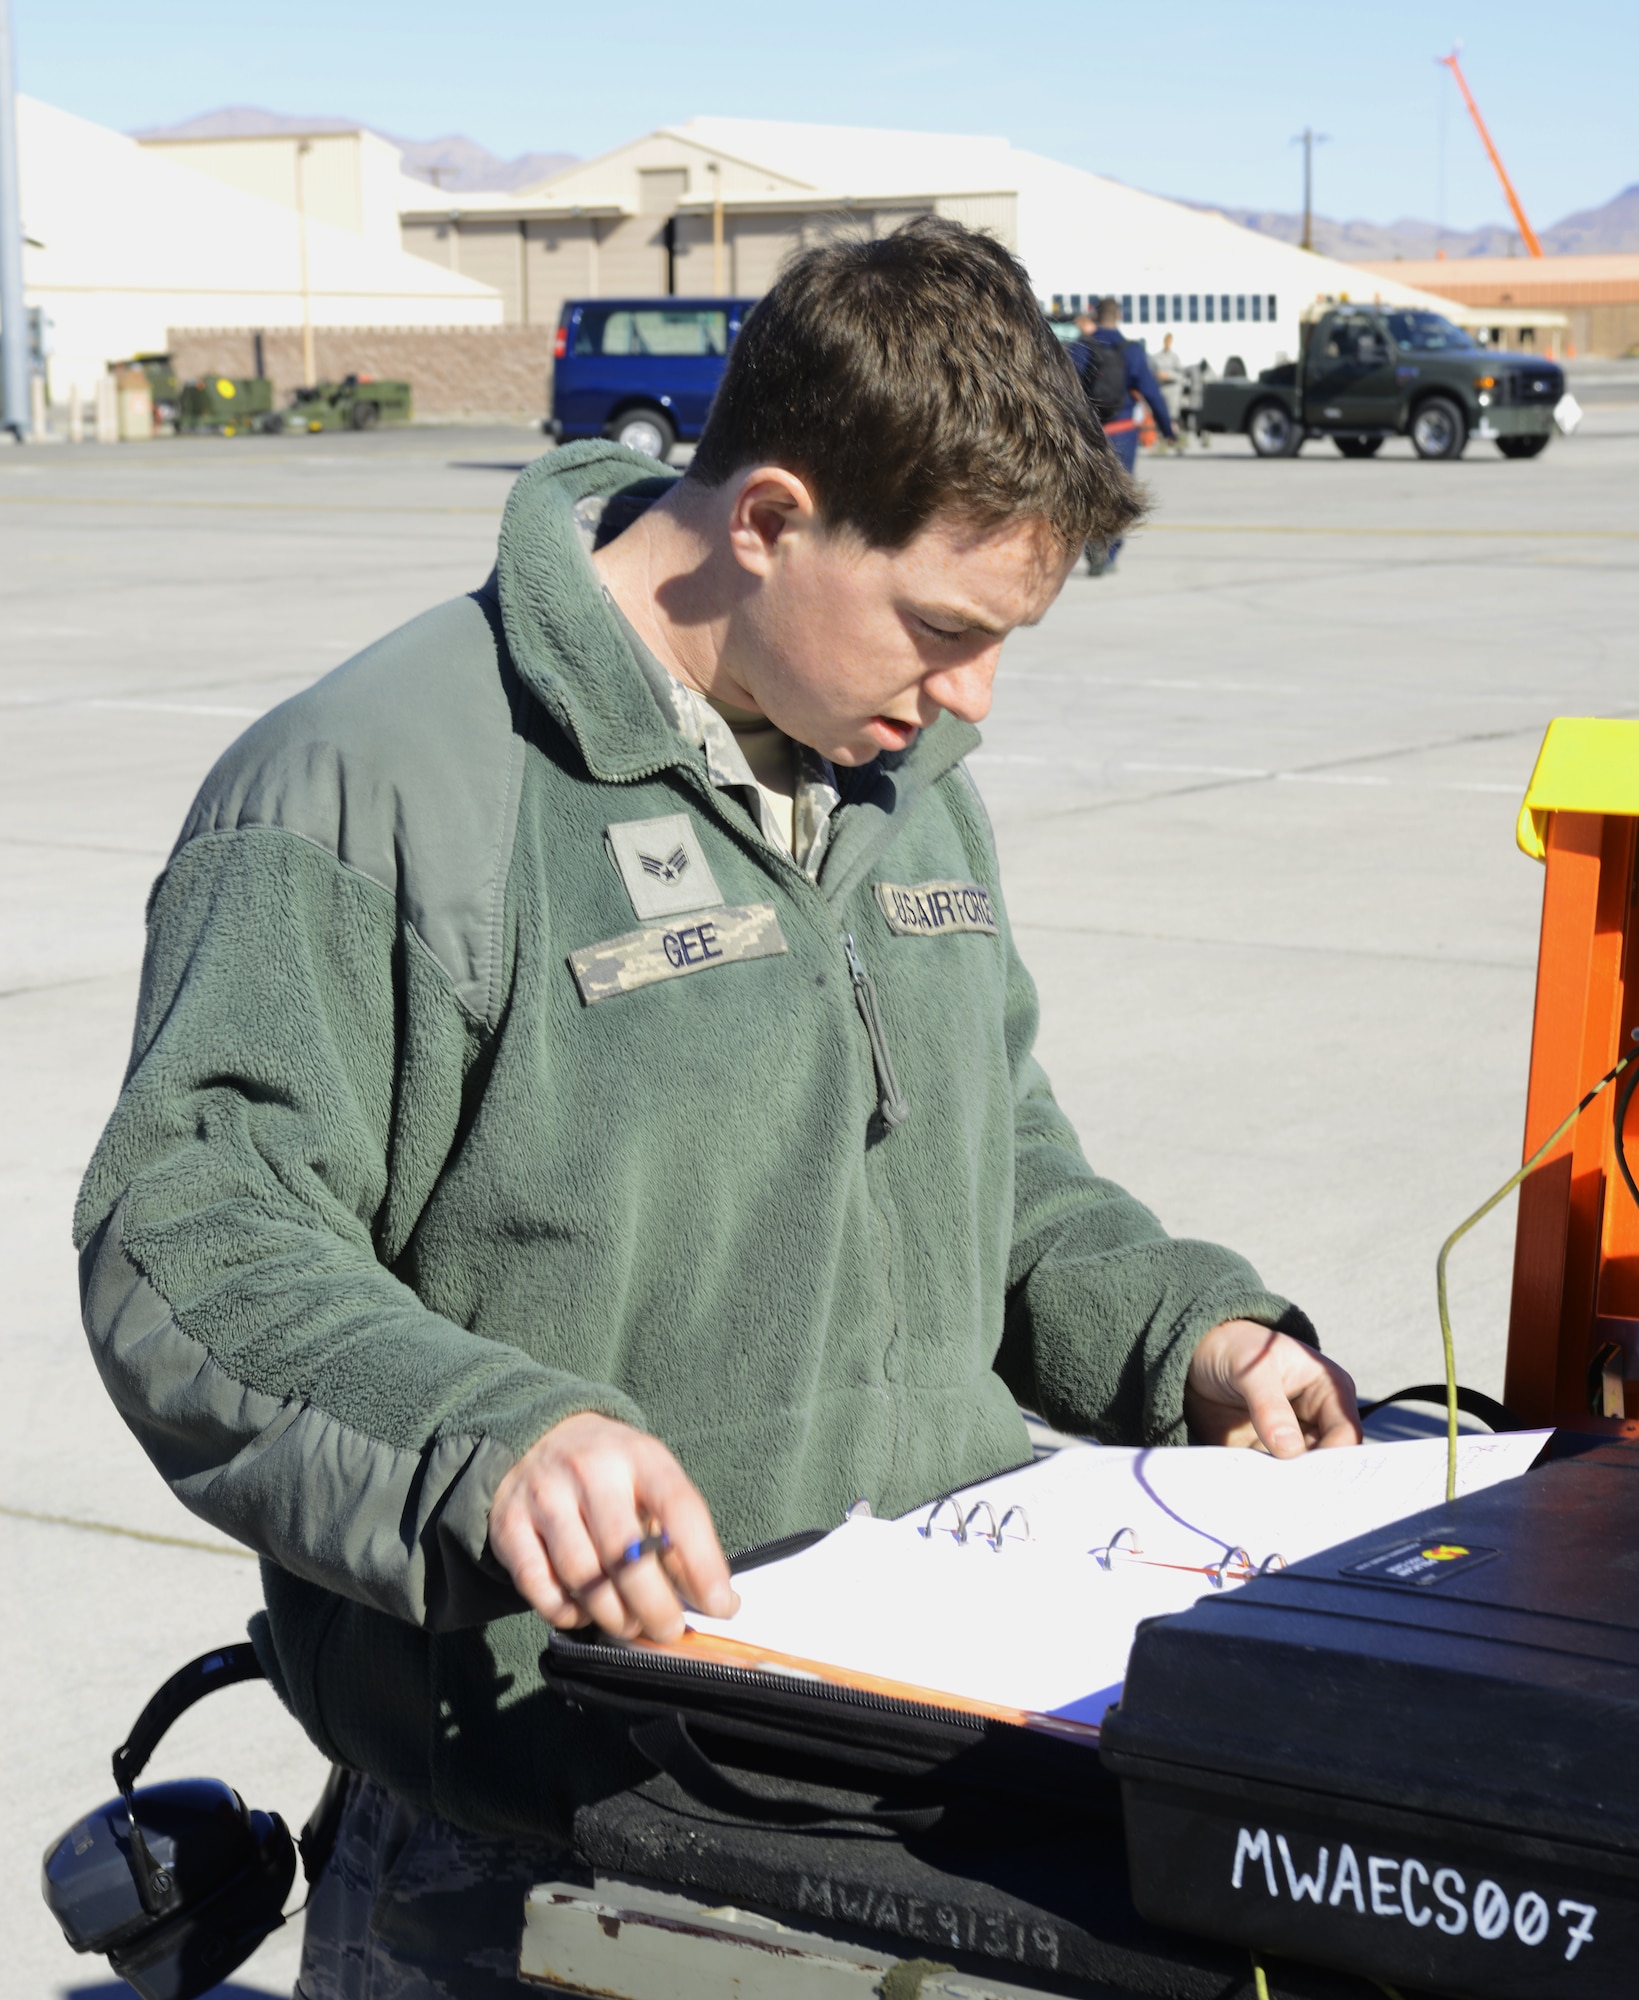 Senior Airman Jordan Gee, 366th Aircraft Maintenance Squadron weapons journeyman, goes through technical notes before a flight Jan 27, 2014, at Nellis Air Force Base, Nev. Gee is one of more than 3,200 participants in the combat exercise Red Flag 14-1. The purpose of the exercise is to increase the combat capability of U.S. and allied air forces for future combat situations. (U.S. Air Force photo by Senior Airman Benjamin Sutton/Released)